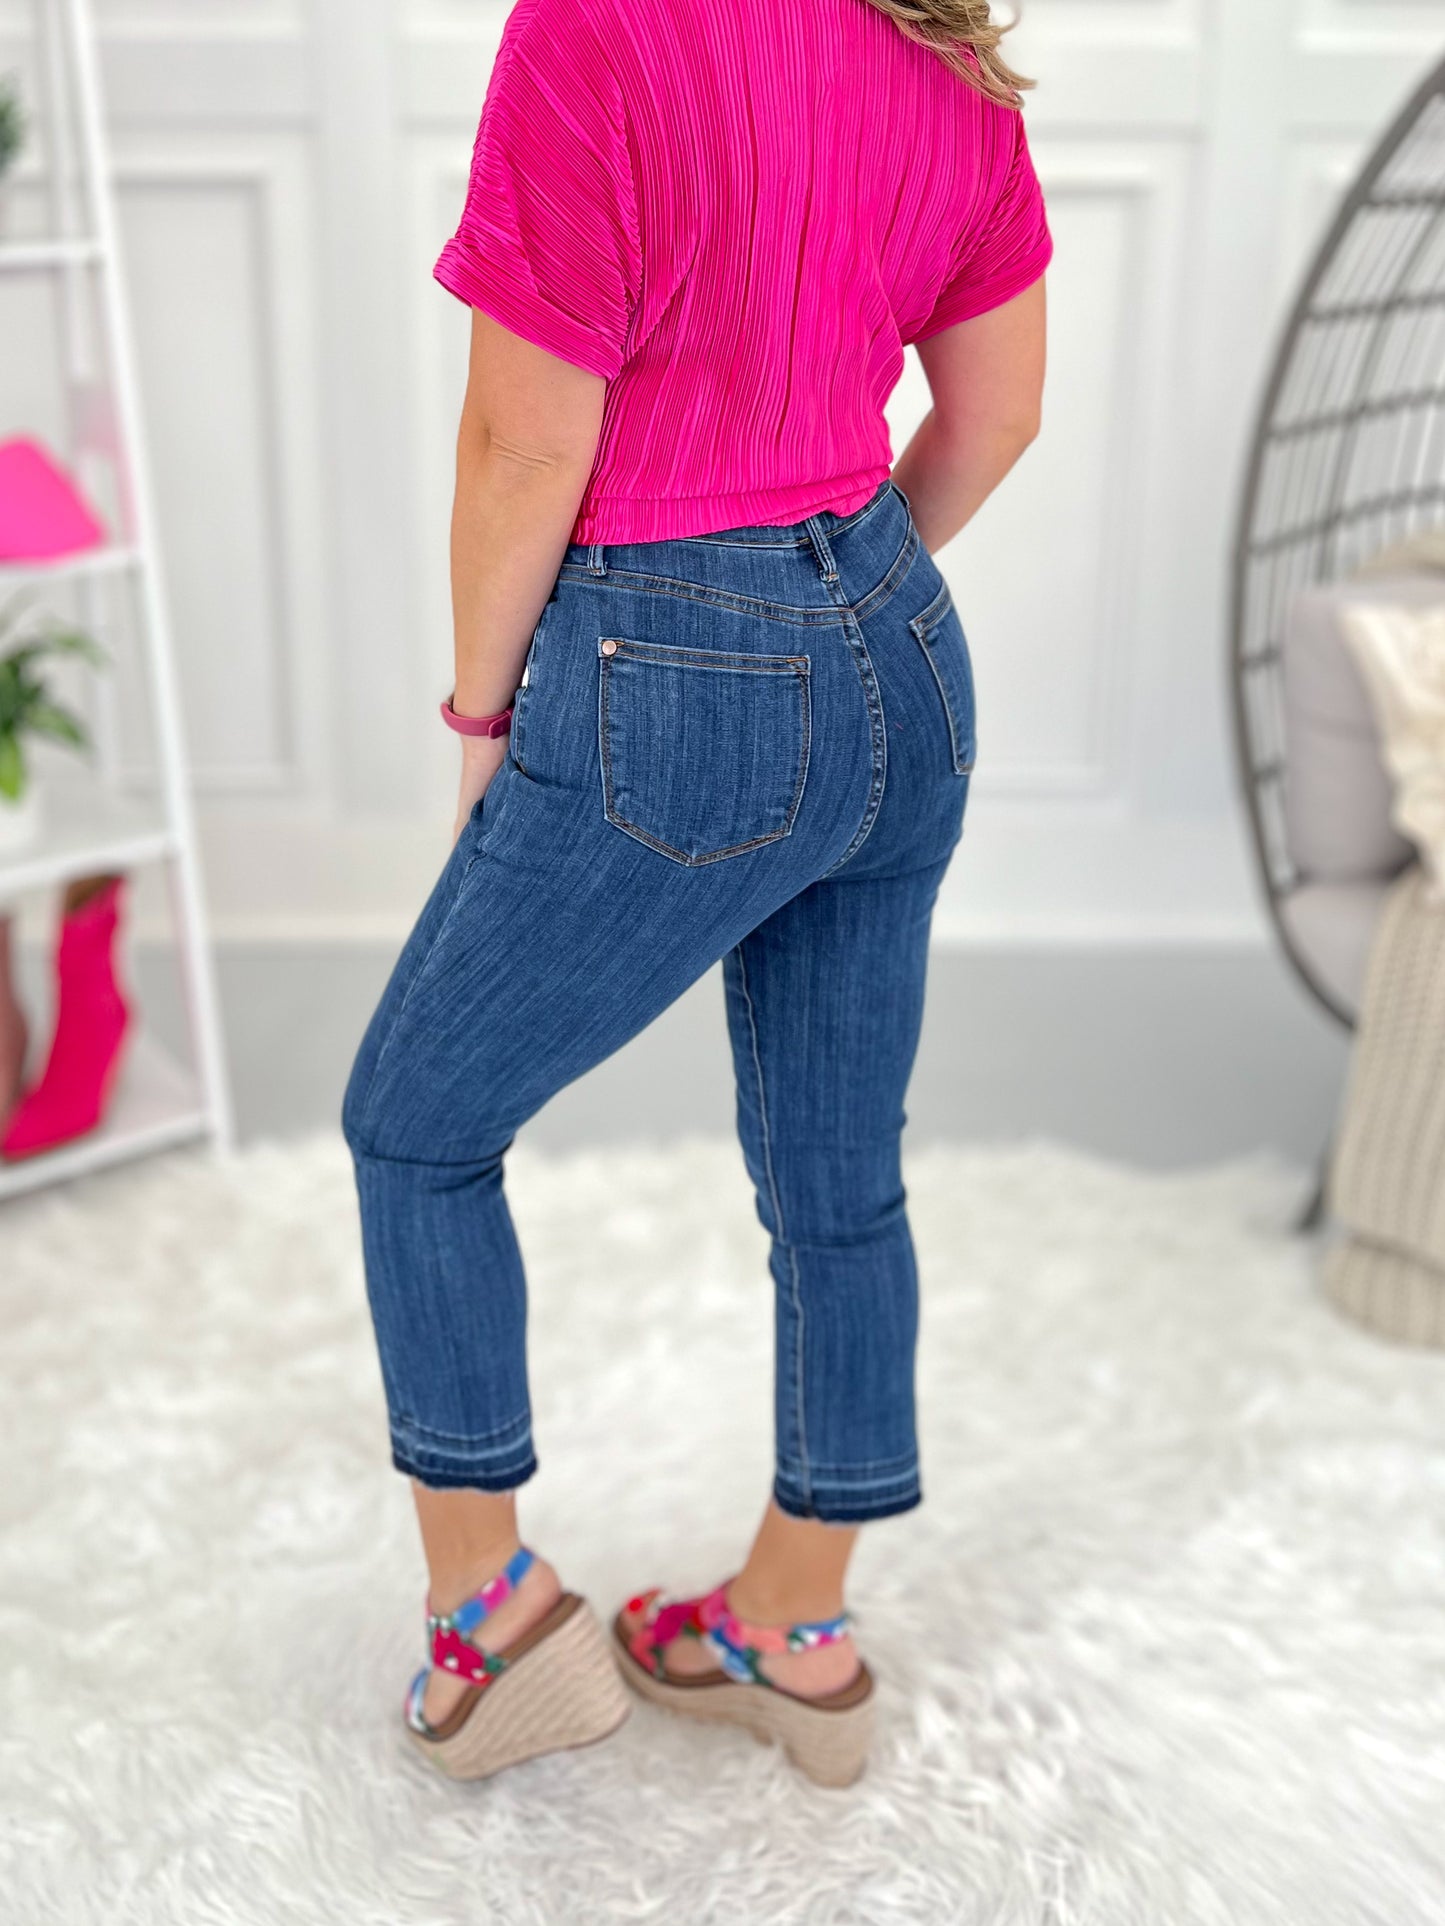 Save The Best For Last - Judy Blue Pull On Denim Capris